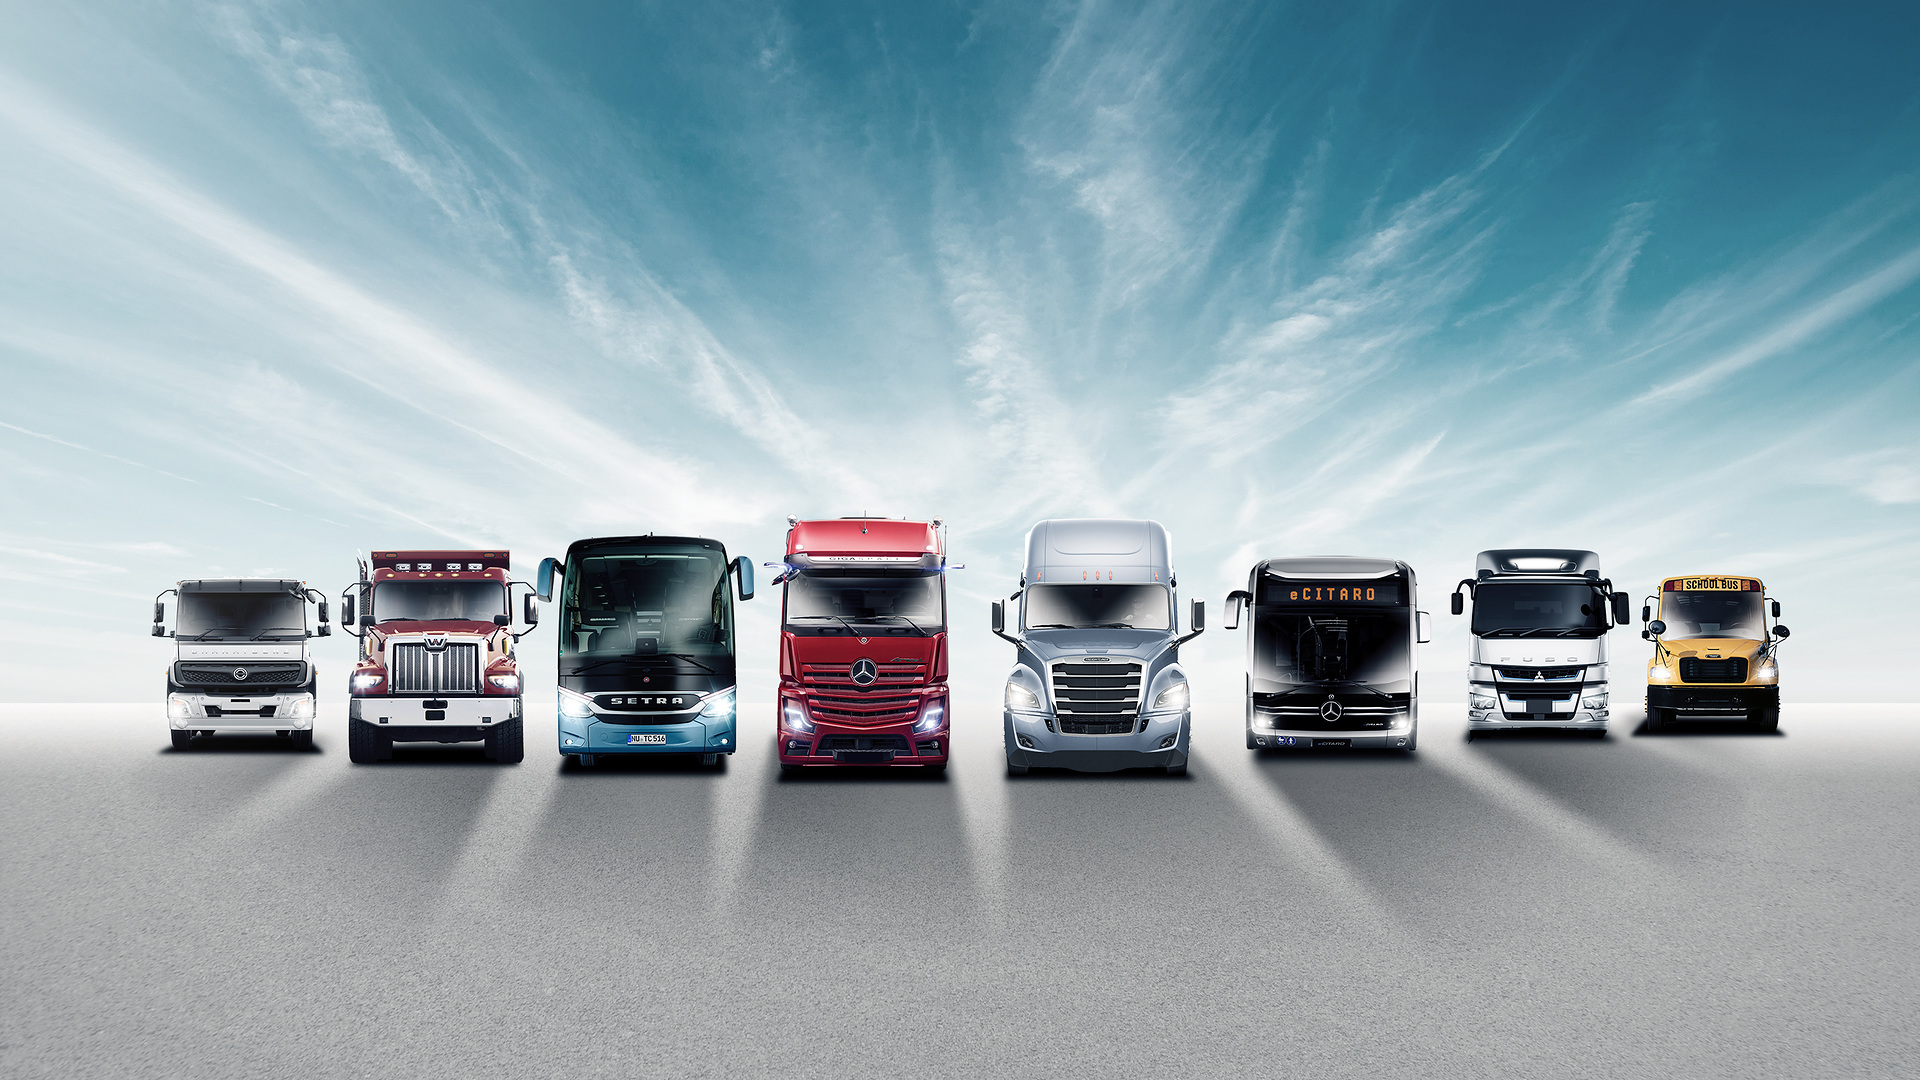 Daimler Truck reports expected strong group sales in 2022